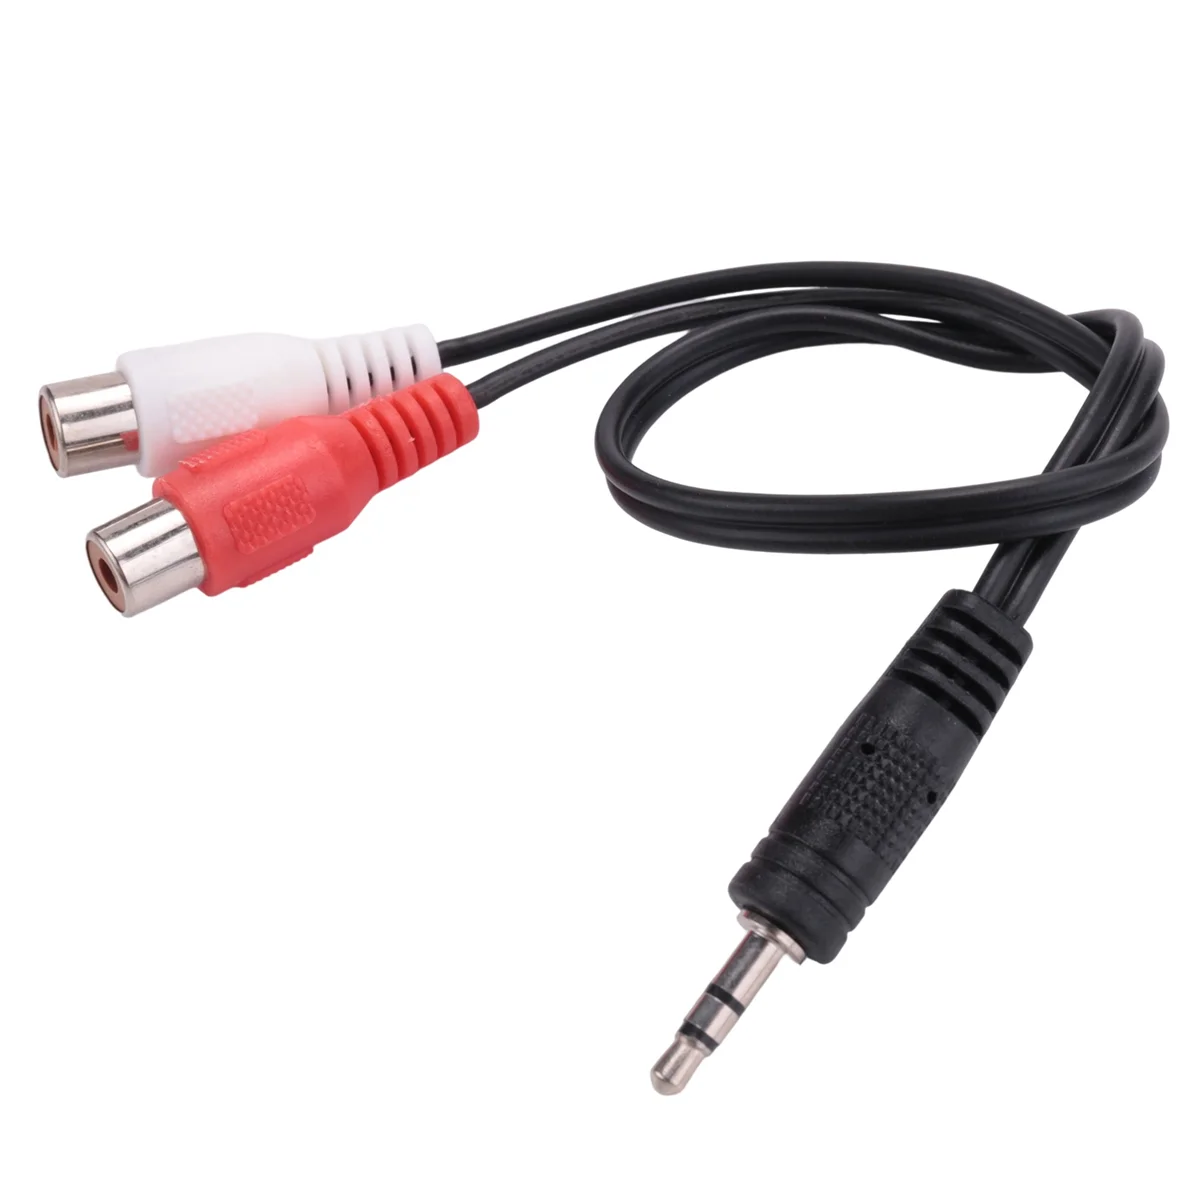 

3.5mm stereo adapter headphone jack to 2 RCA jack adapter audio cable, 3.5mm Male to 2x RCA Female